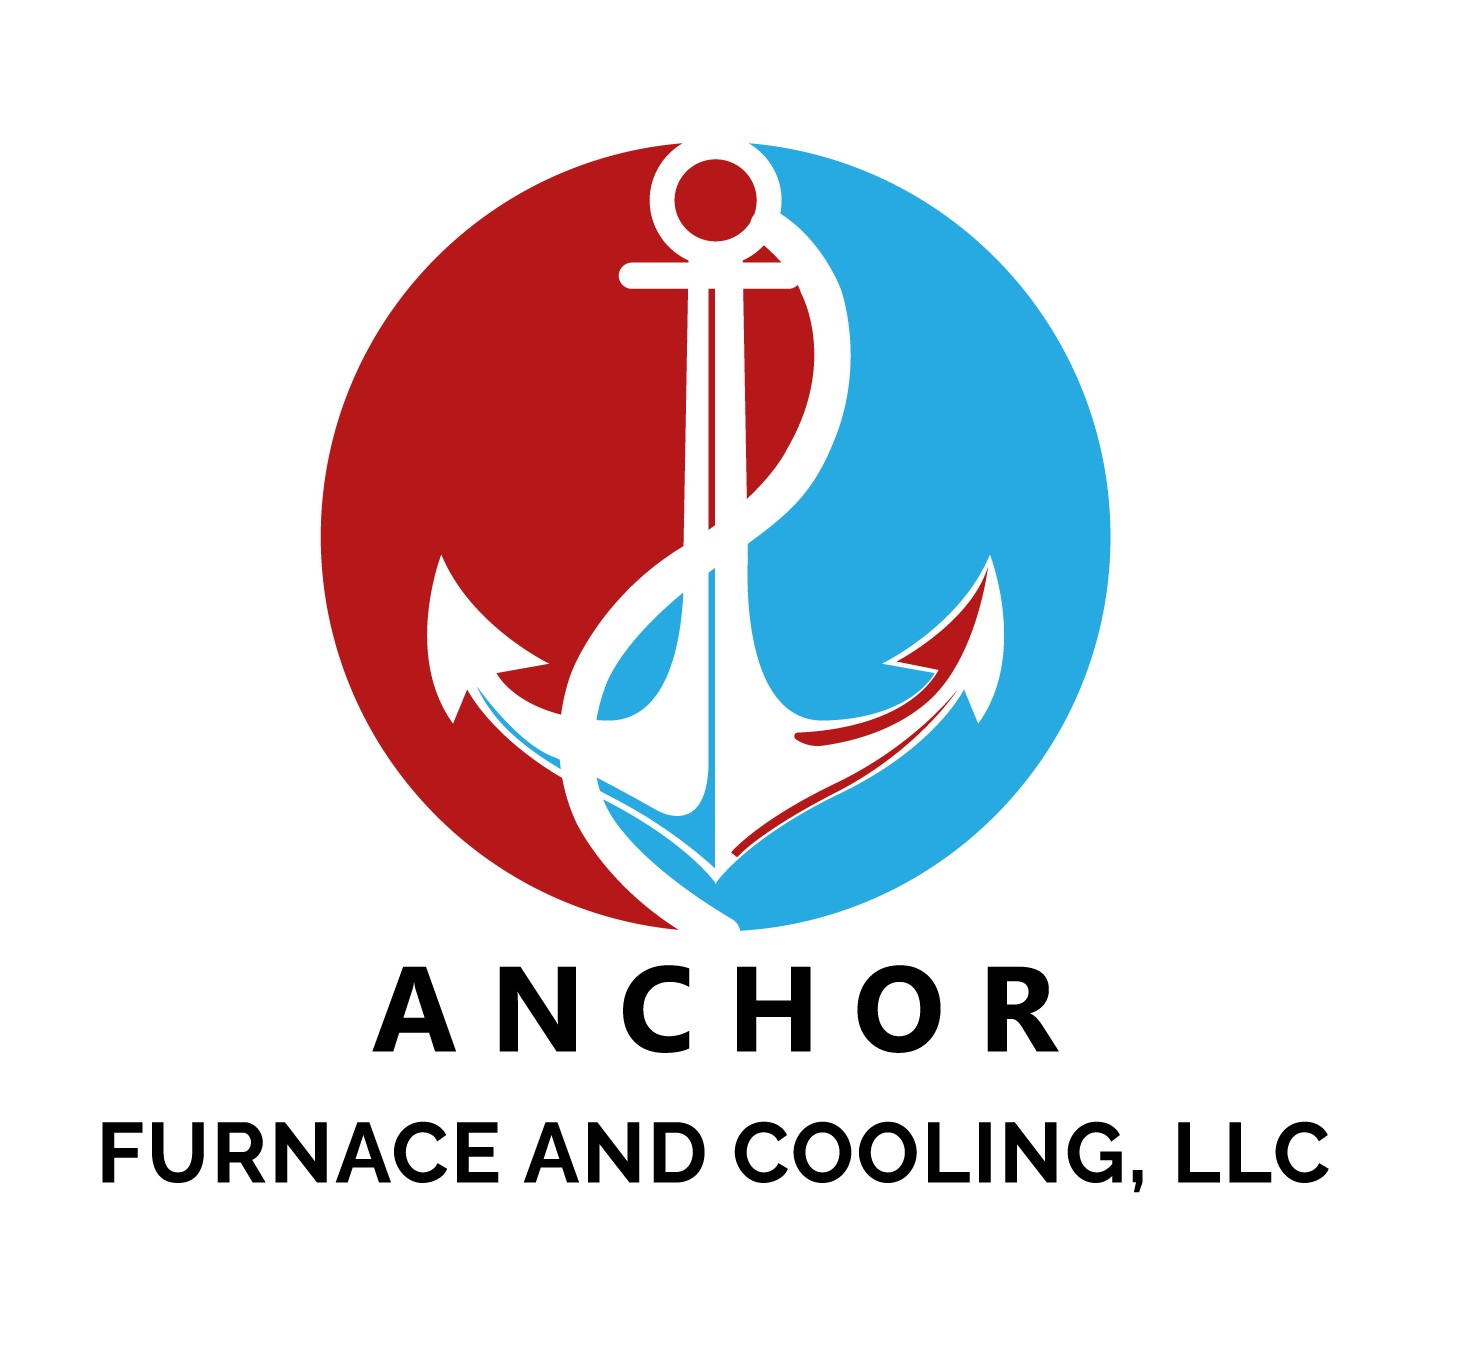 Anchor Furnace and Cooling, LLC Logo